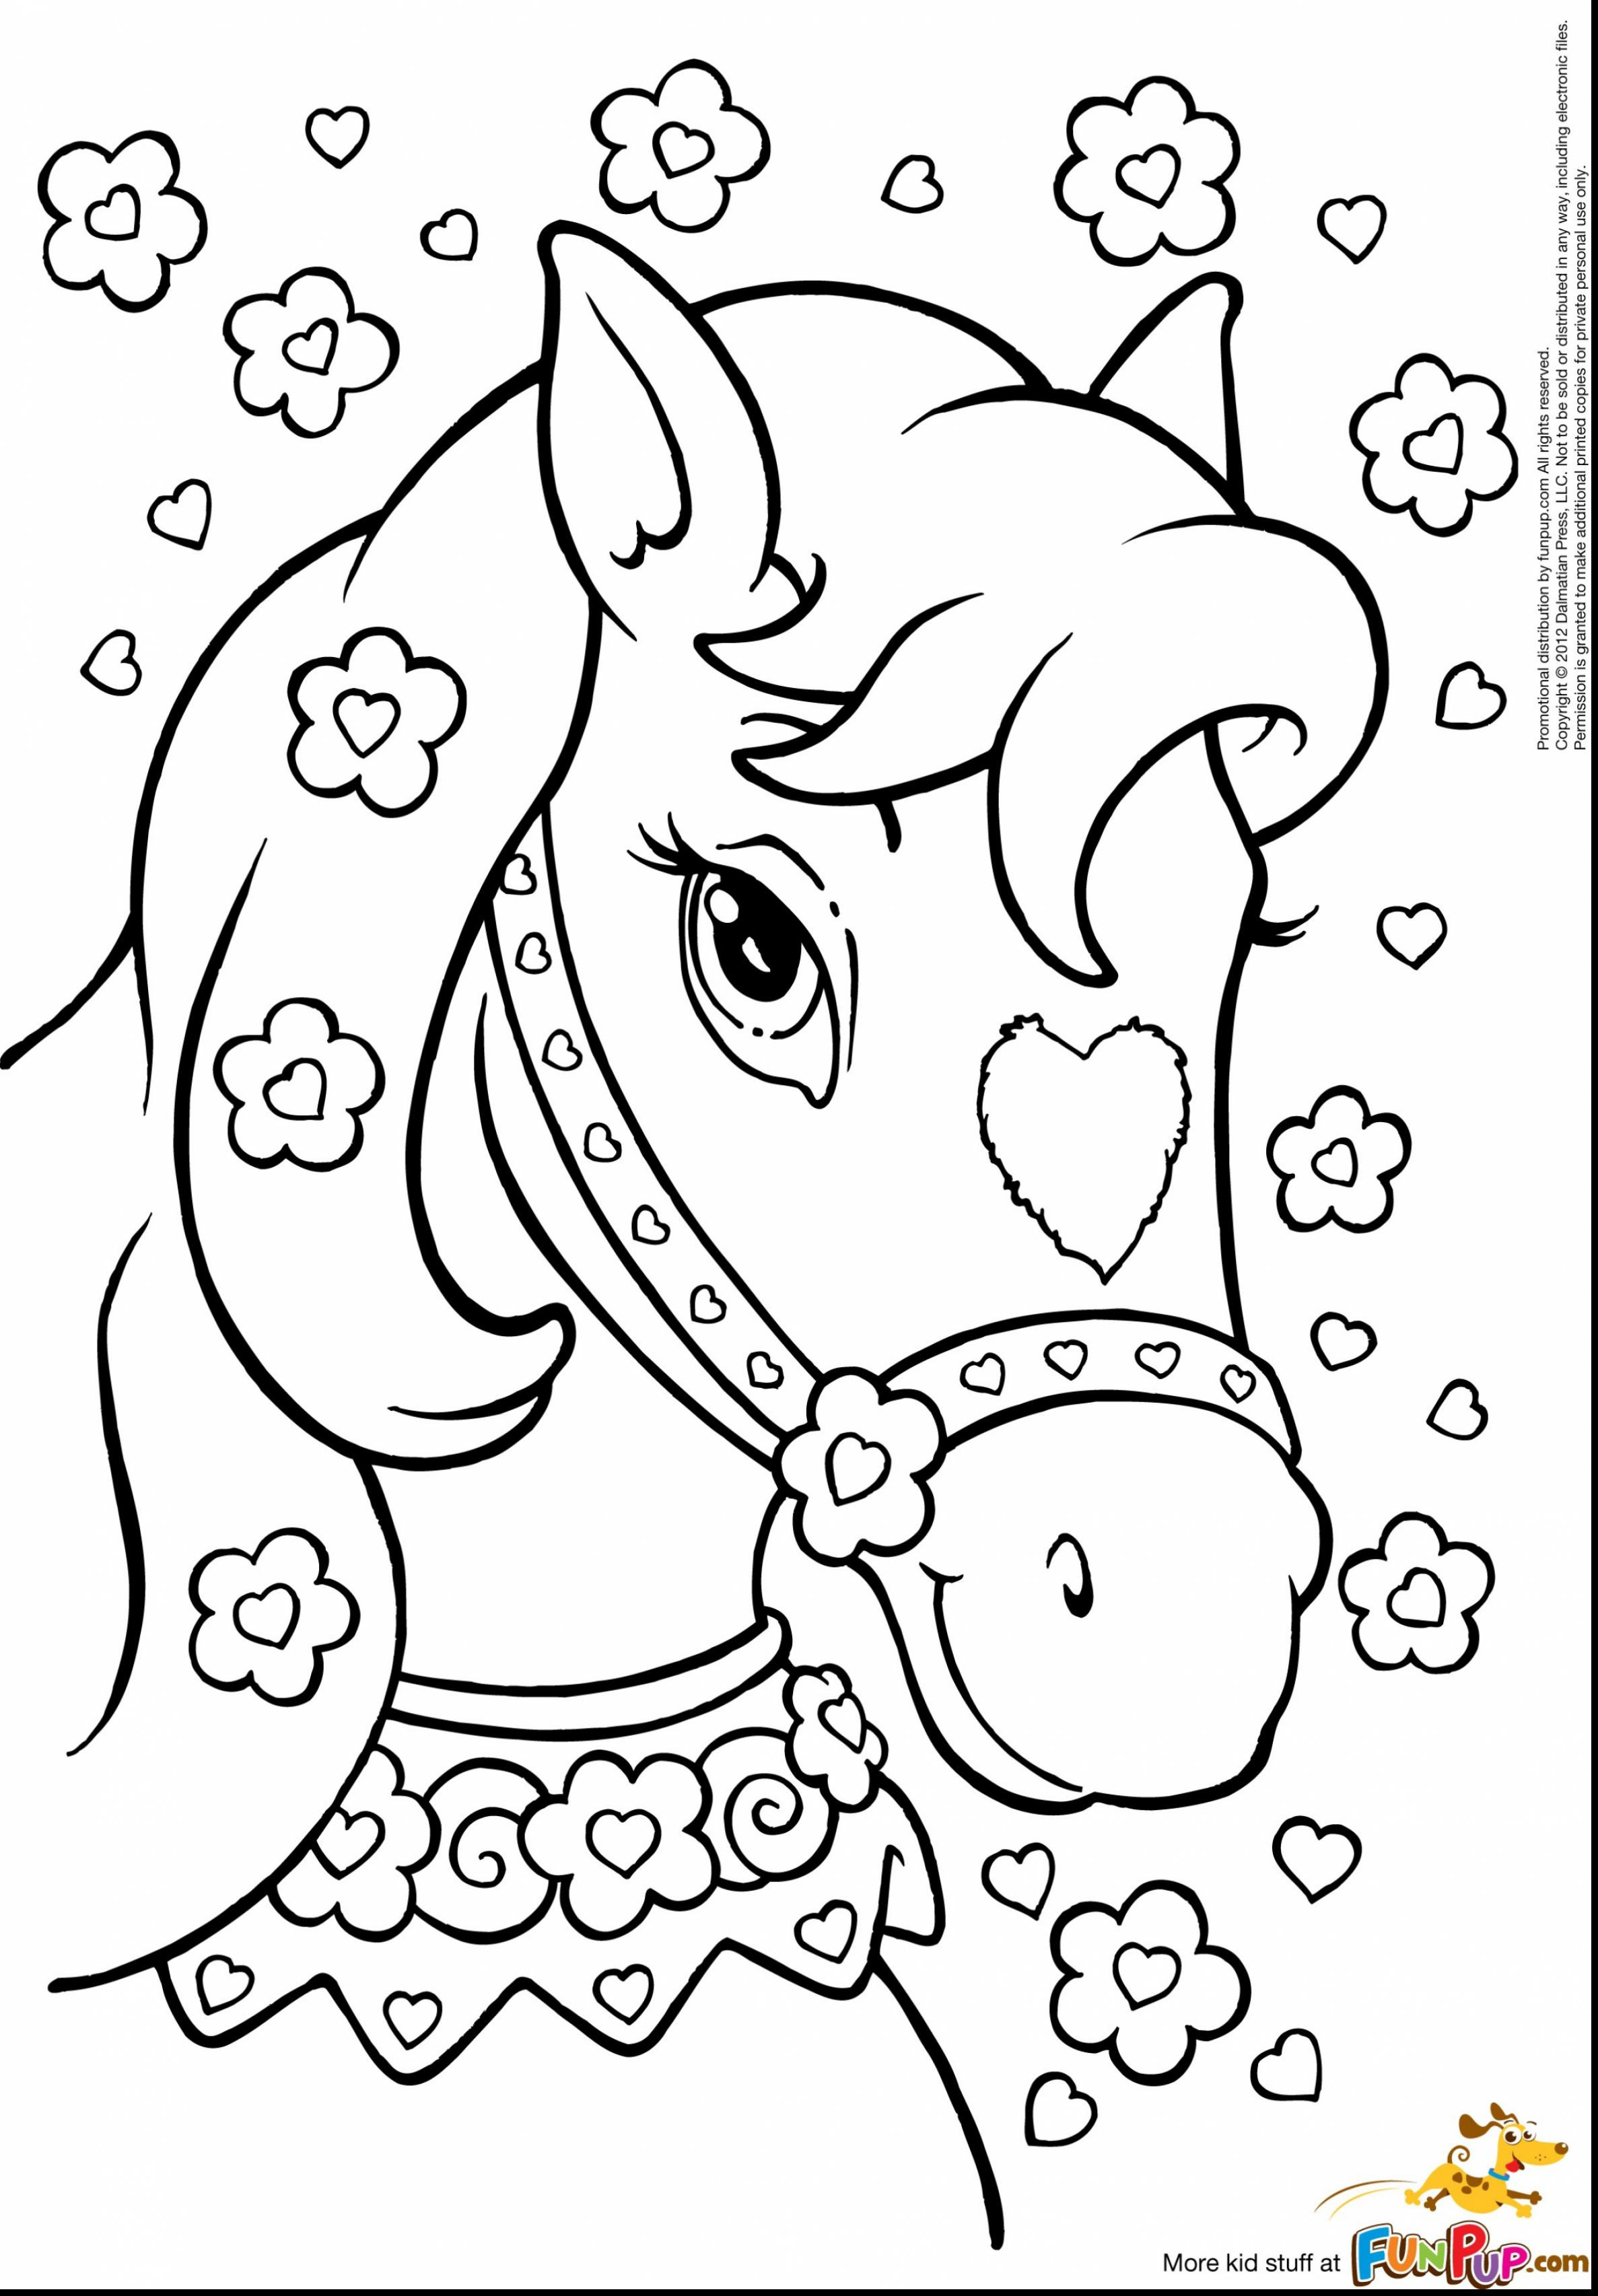 Barbie Head Coloring Pages at GetColorings.com | Free printable